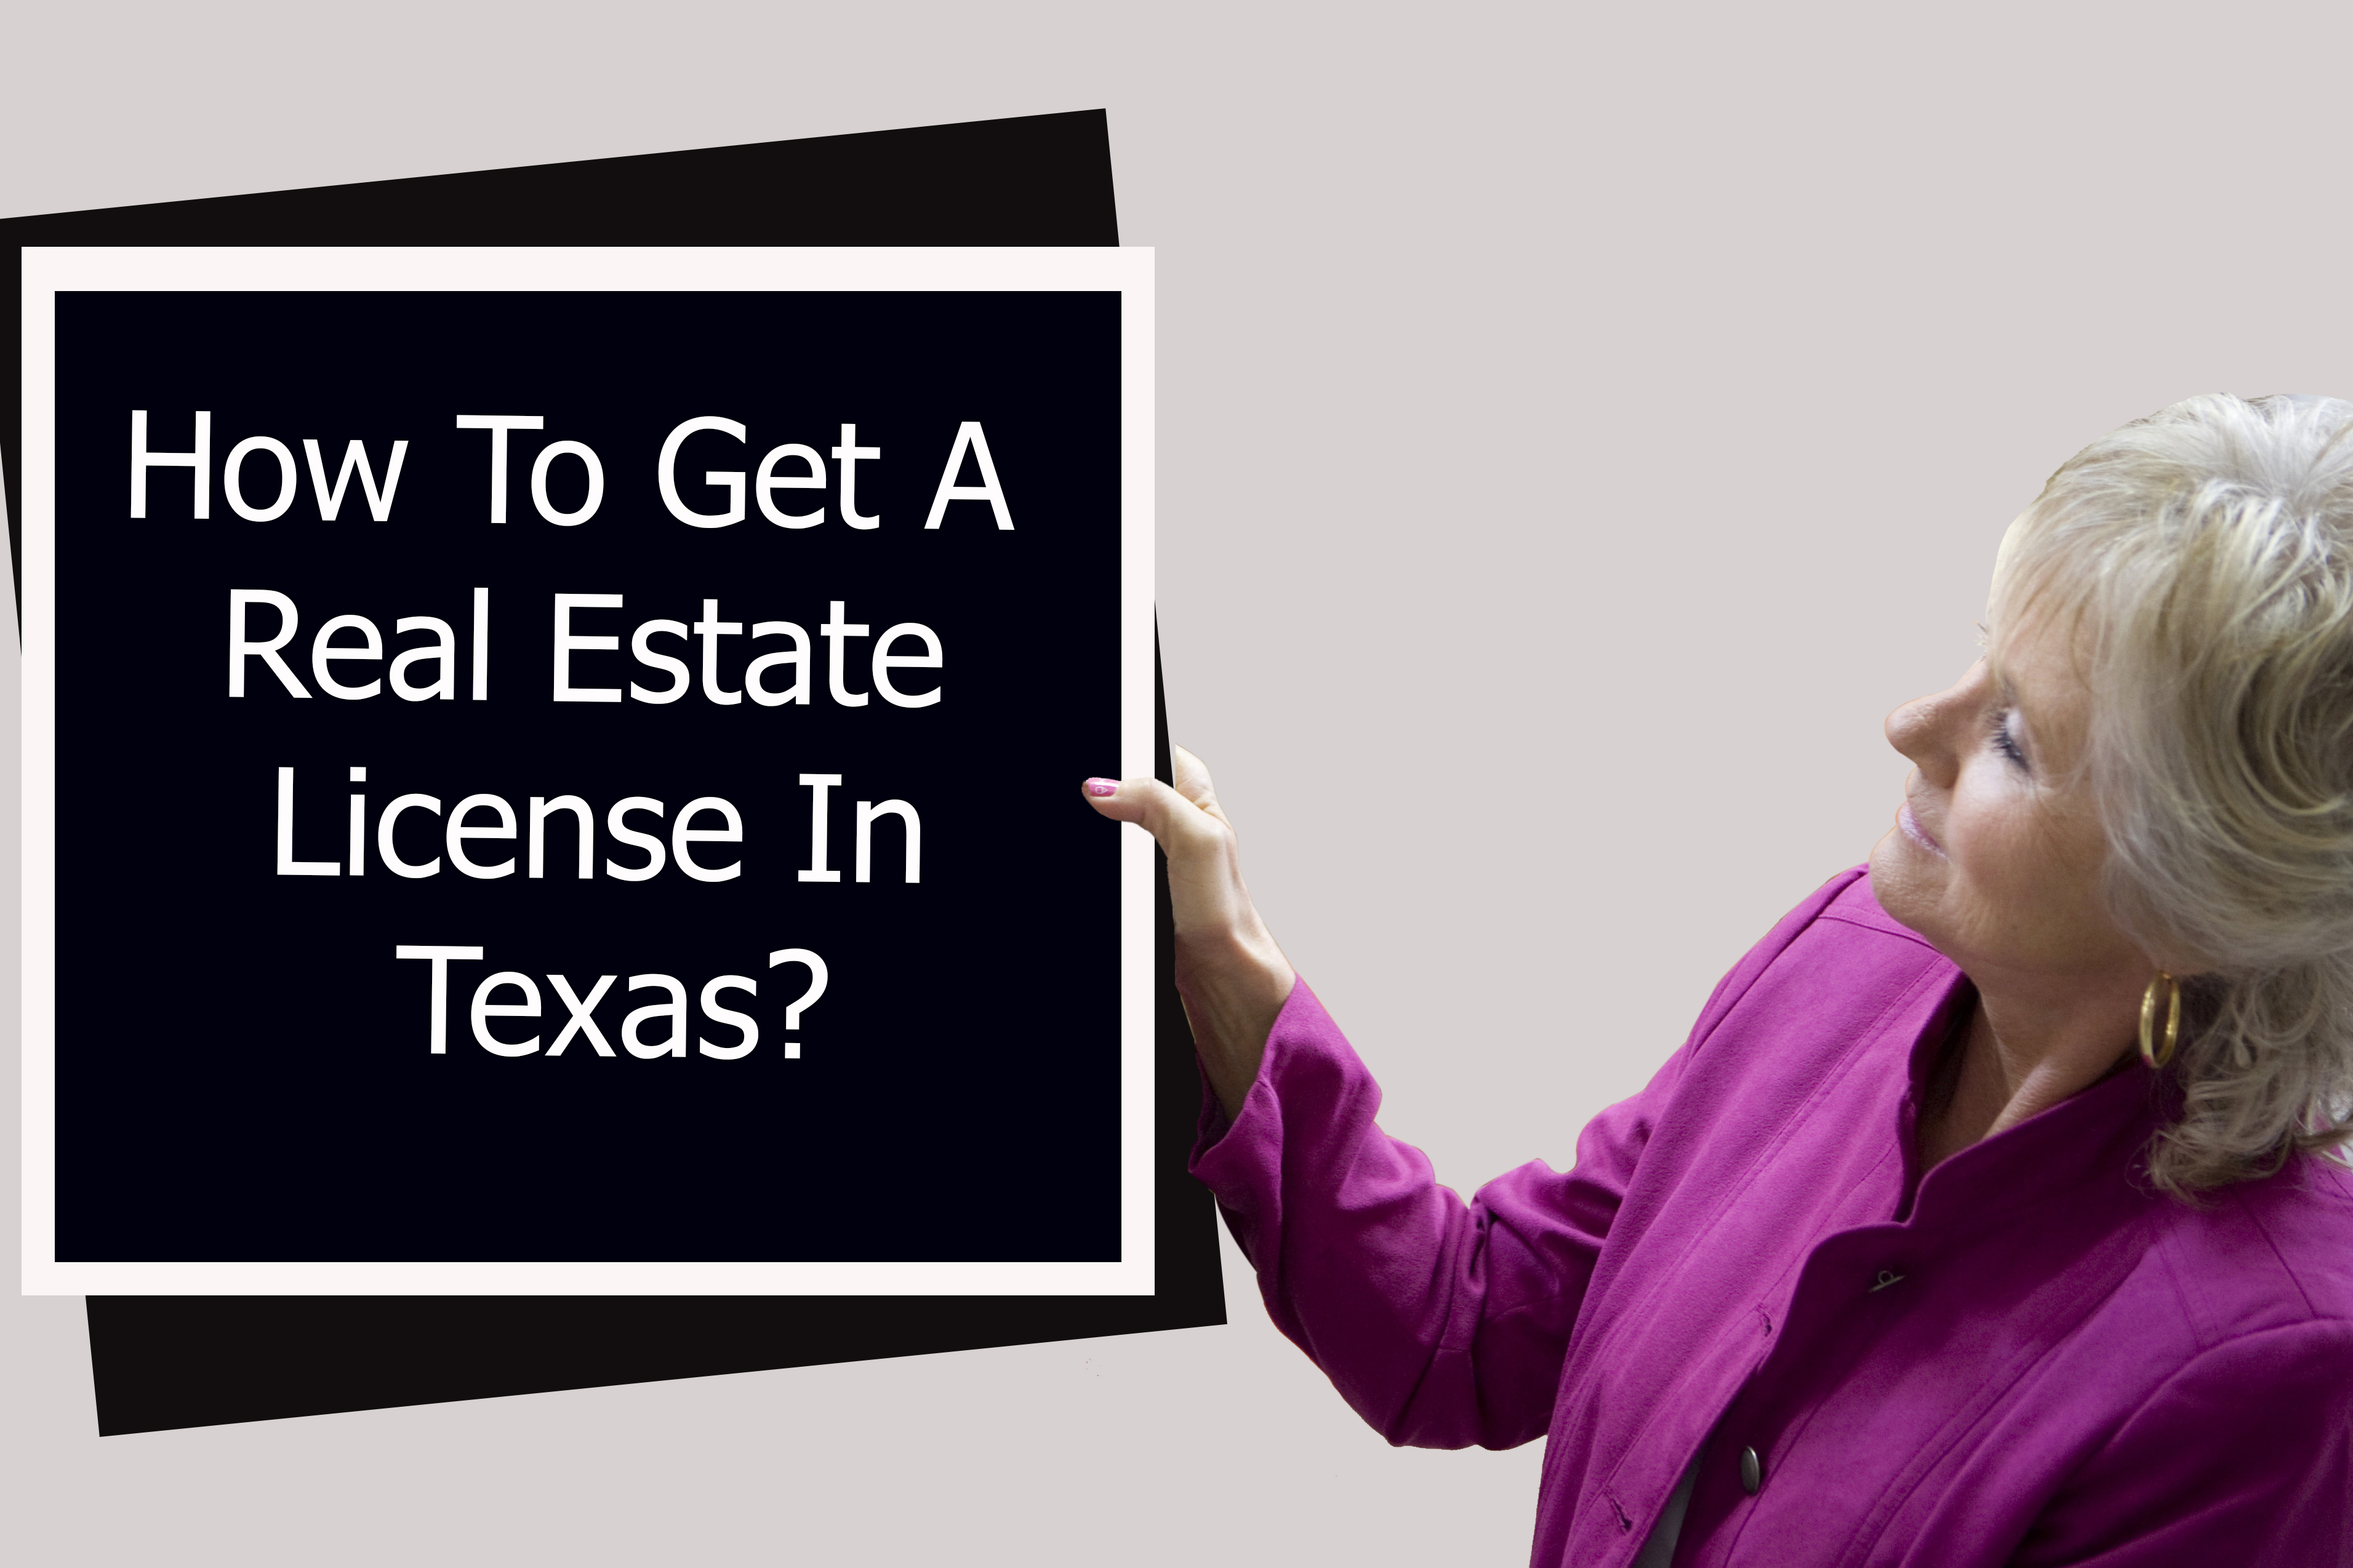 How To Get A Real Estate License In Texas?